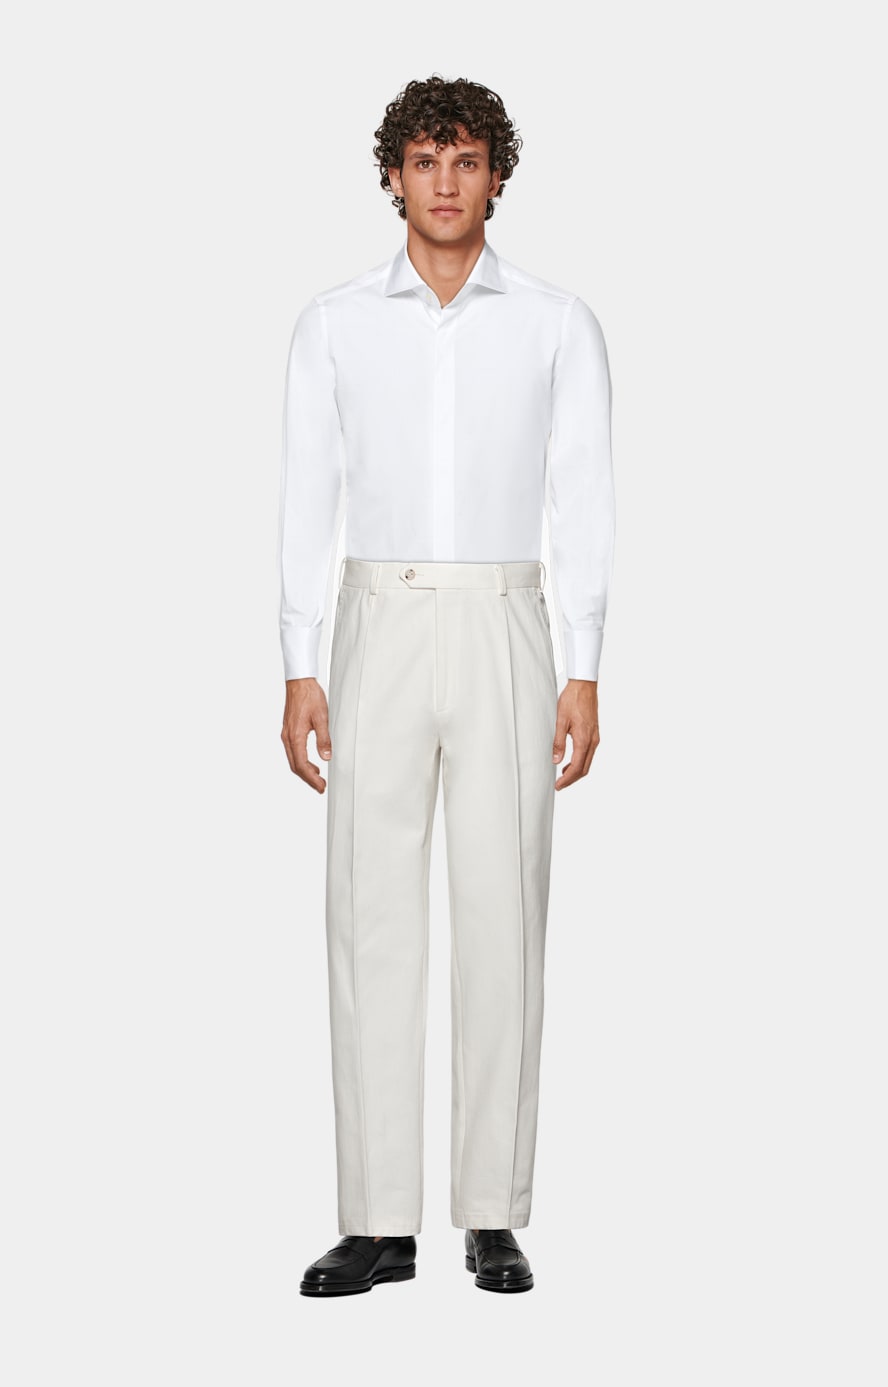 Chemise de smoking en twill coupe Tailored blanche